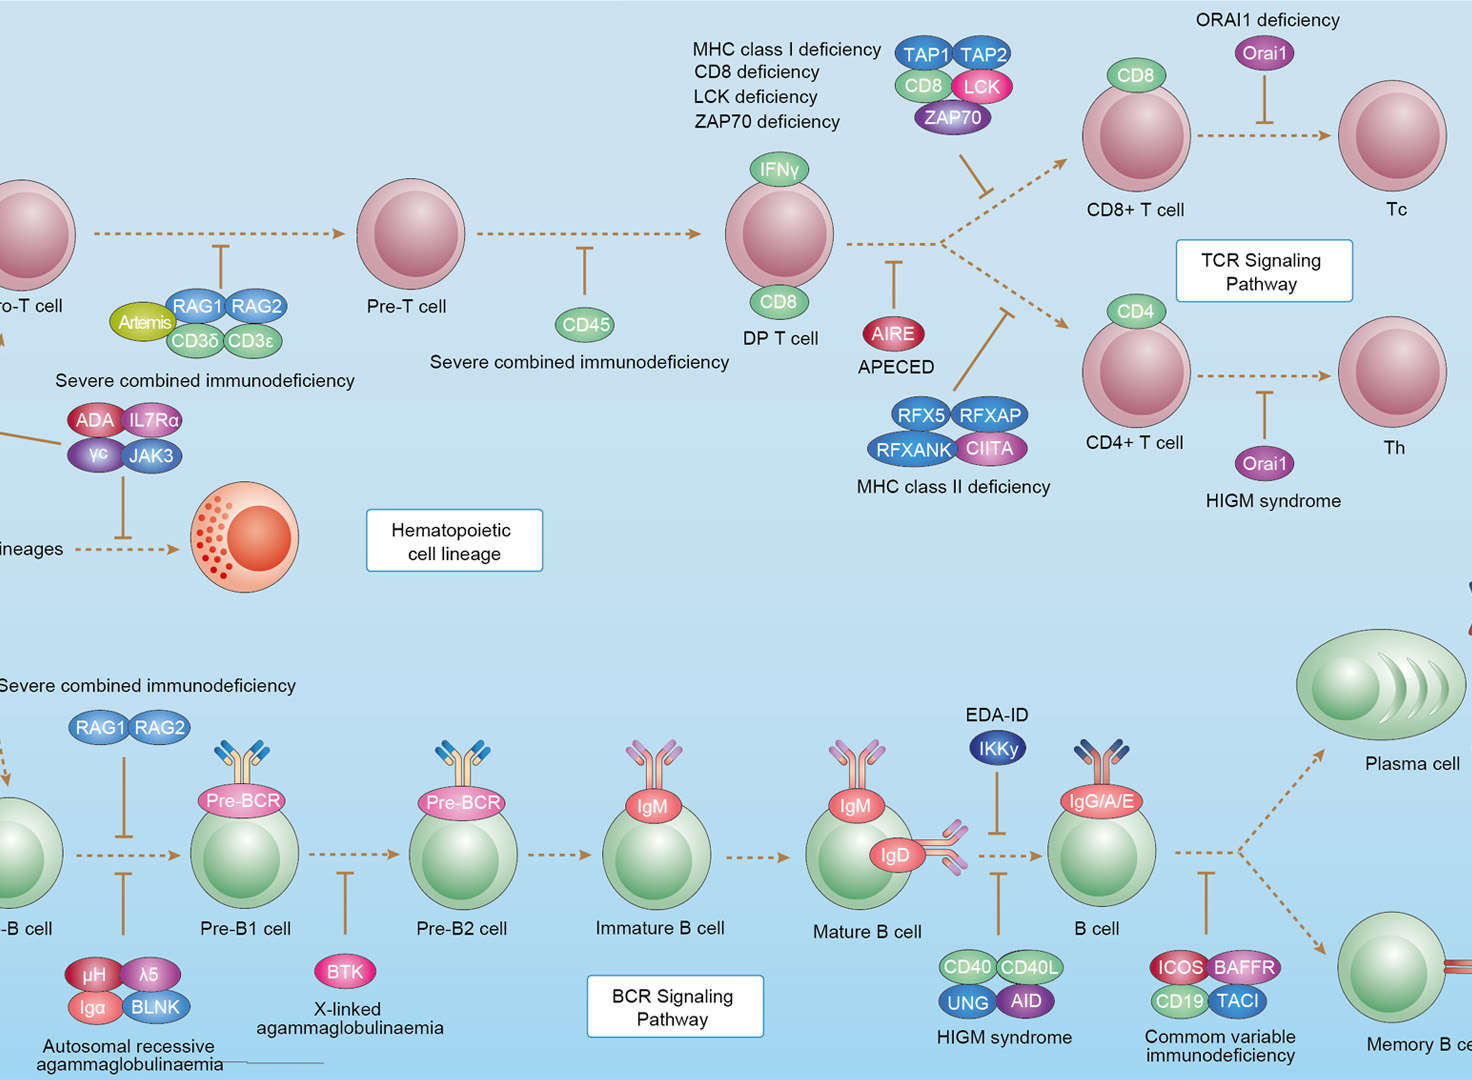 Primary Immunodeficiency Overview - Pathways, Diagnosis, Targeted Therapies